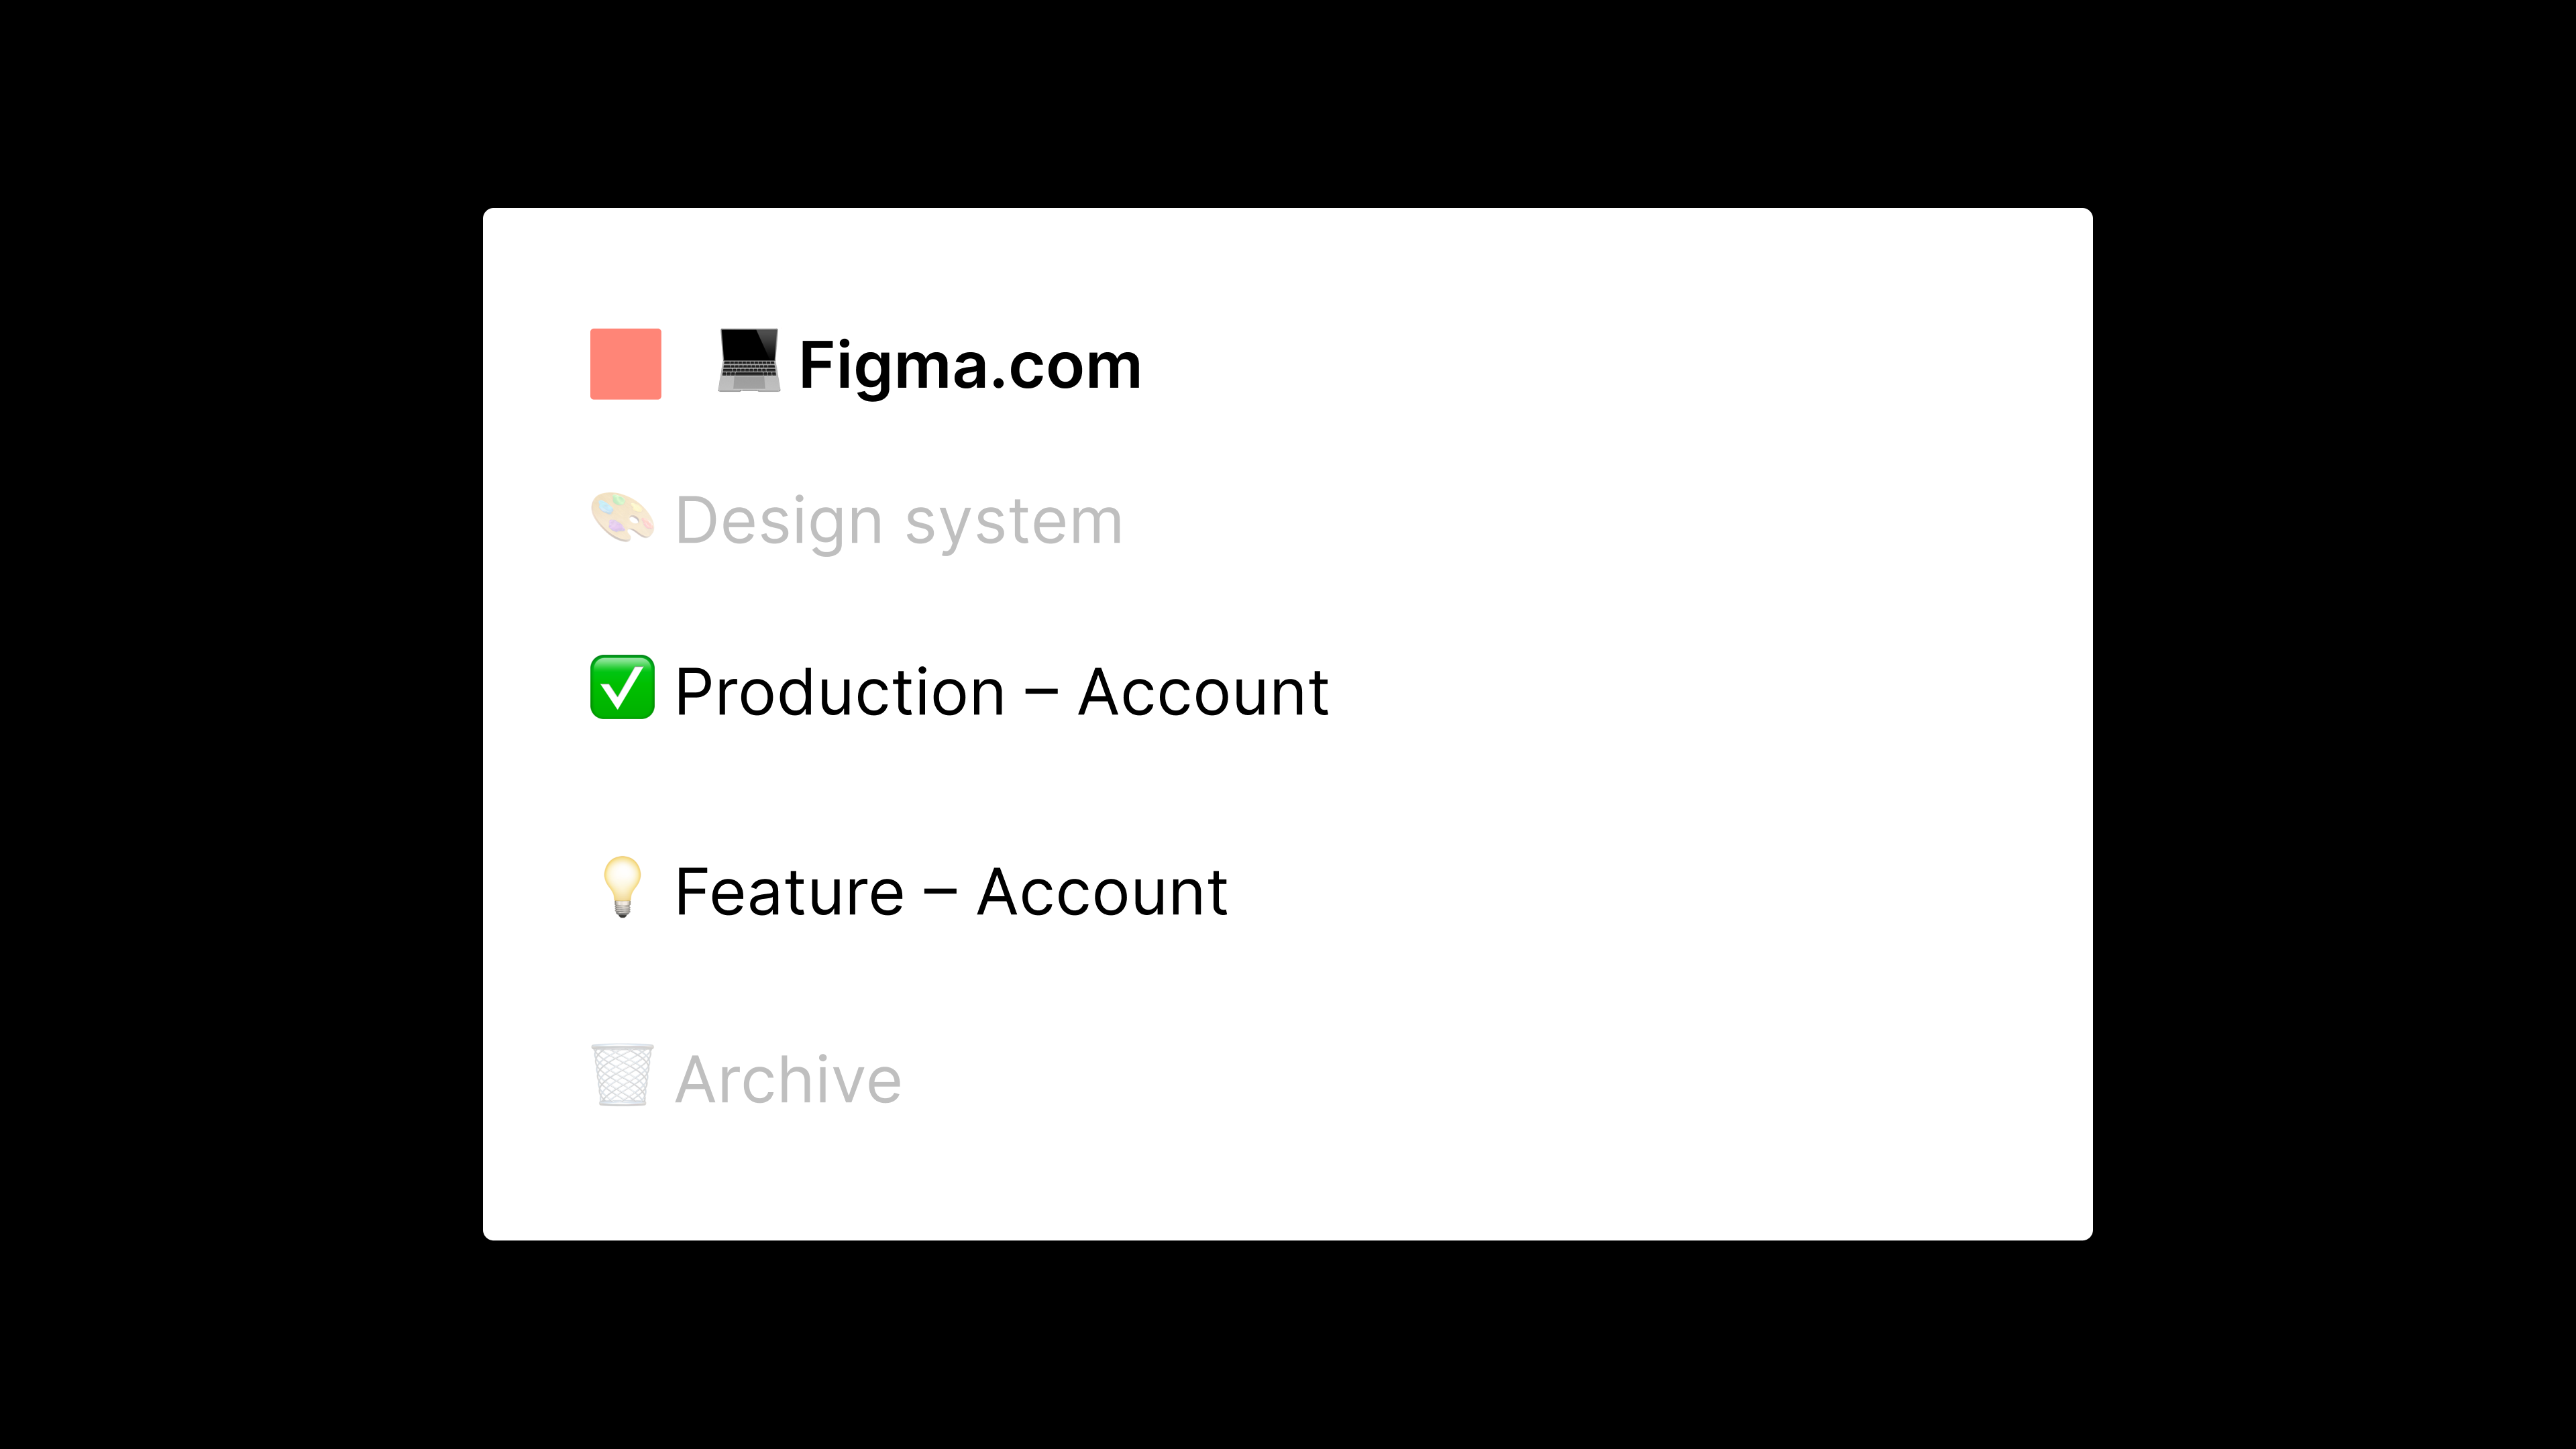 A mockup showing a Figma team and project arrangement. The team is called "Figma," and the projects are "Design system," "Production - Account," "Feature - Account," "Archive." All of the projects apart from "Production - Account" and "Feature - Account" are transparent, bringing prominence to these two.